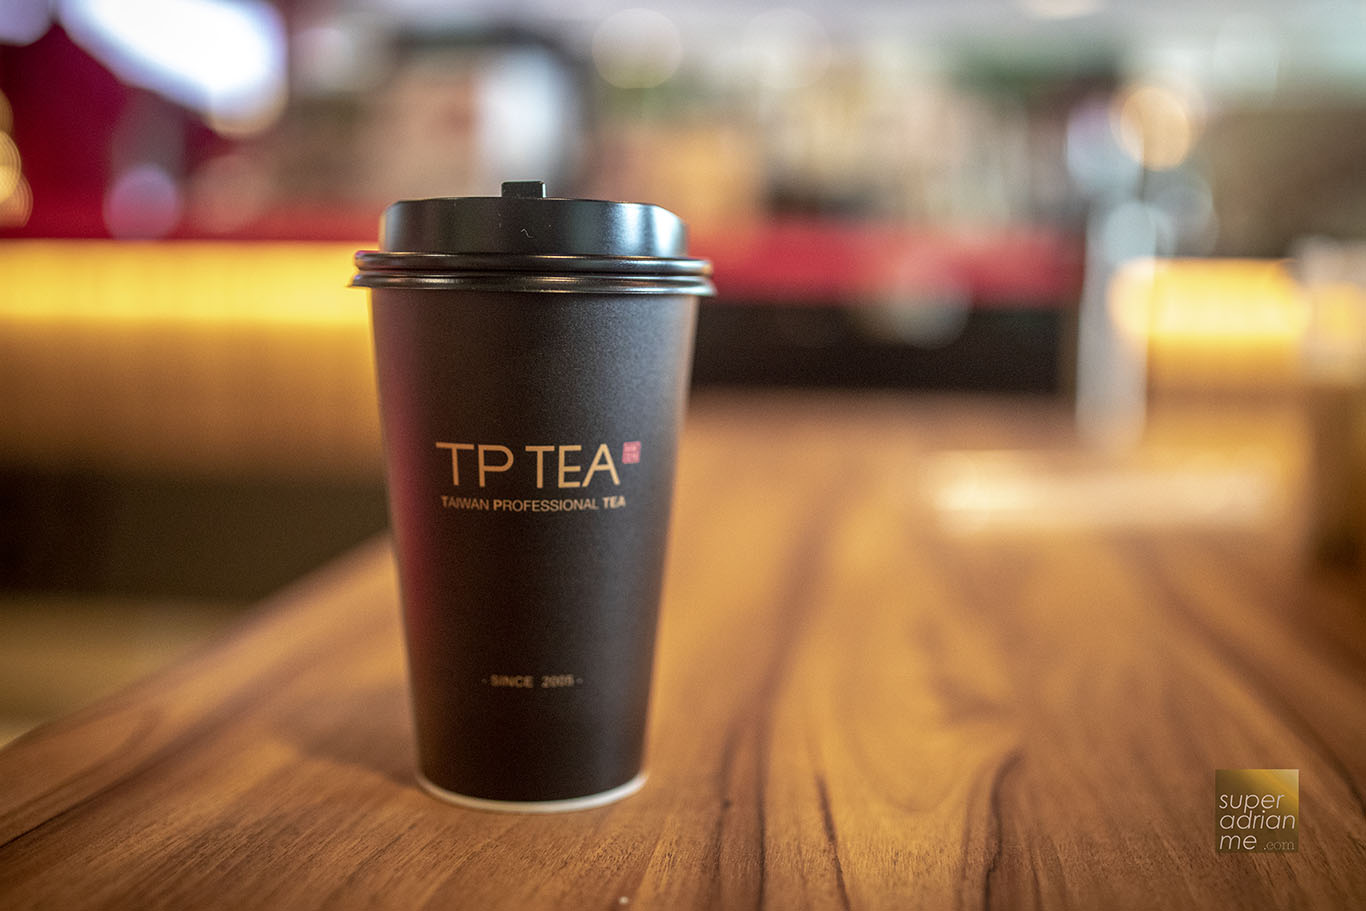 TP TEA beverages are also available hot